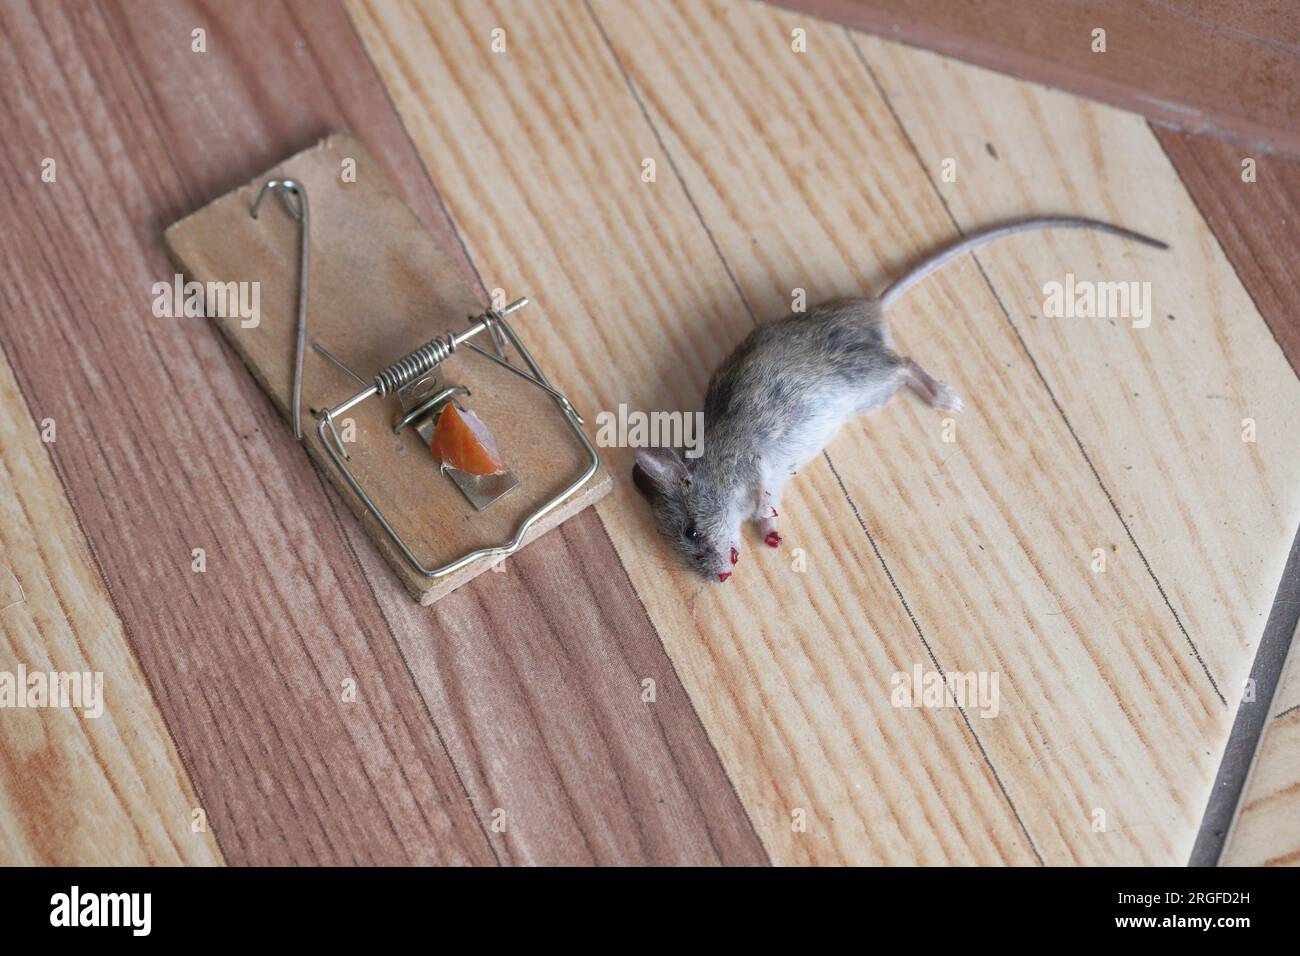 https://c8.alamy.com/comp/2RGFD2H/dead-mouse-caught-in-a-trap-in-a-house-apartment-2RGFD2H.jpg